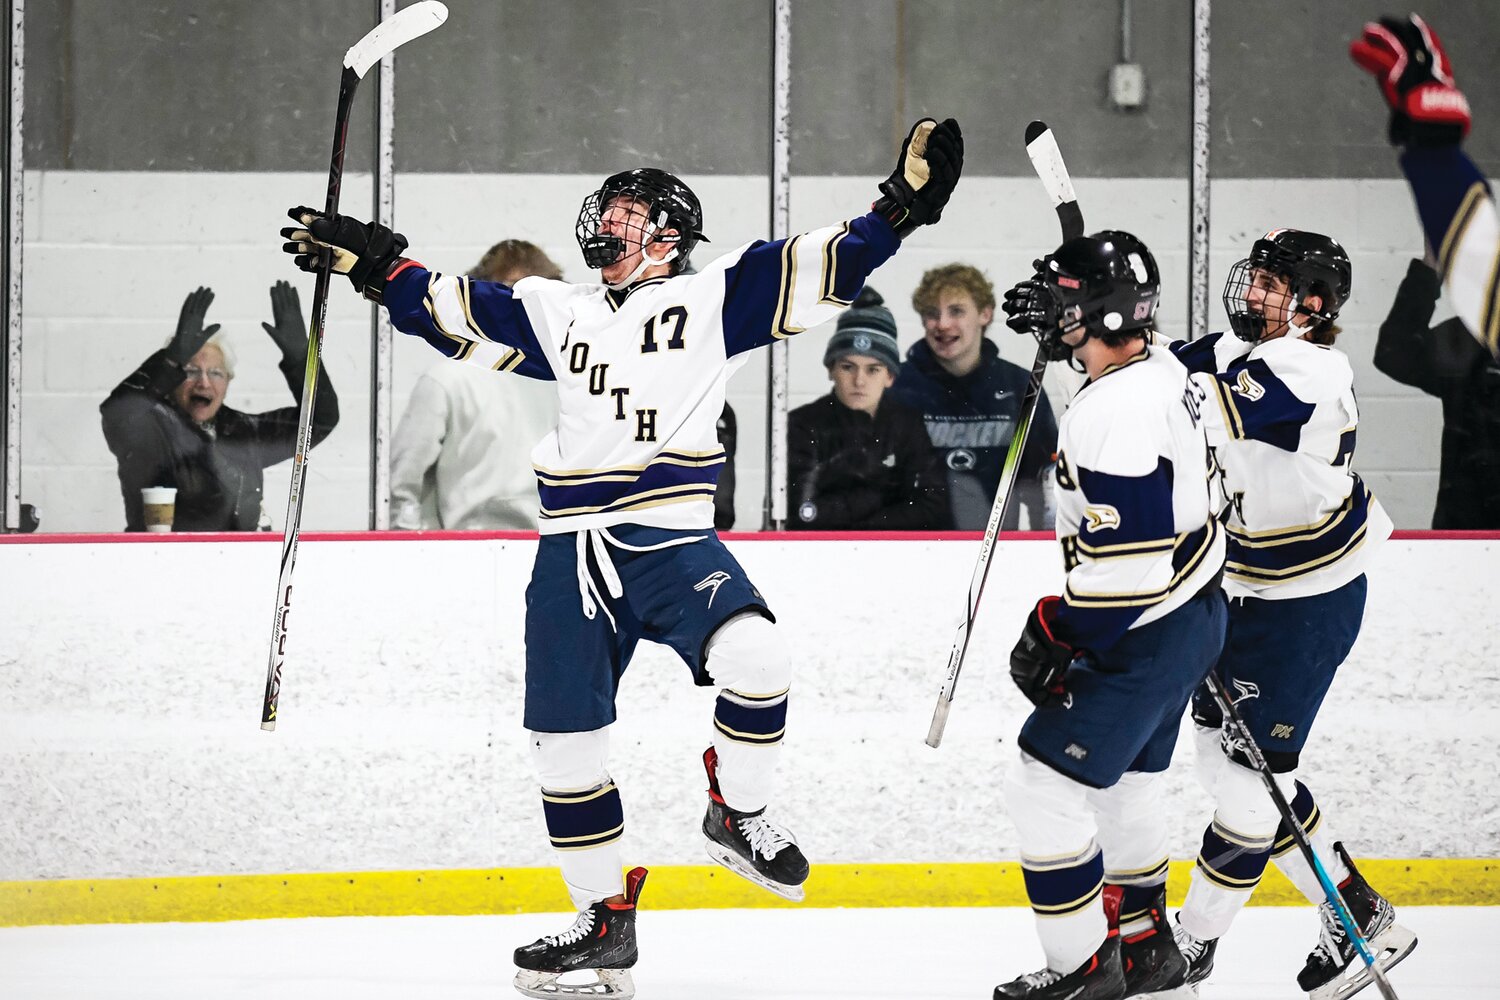 Council Rock South’s Gavin Nisenzon celebrates after his second period goal.